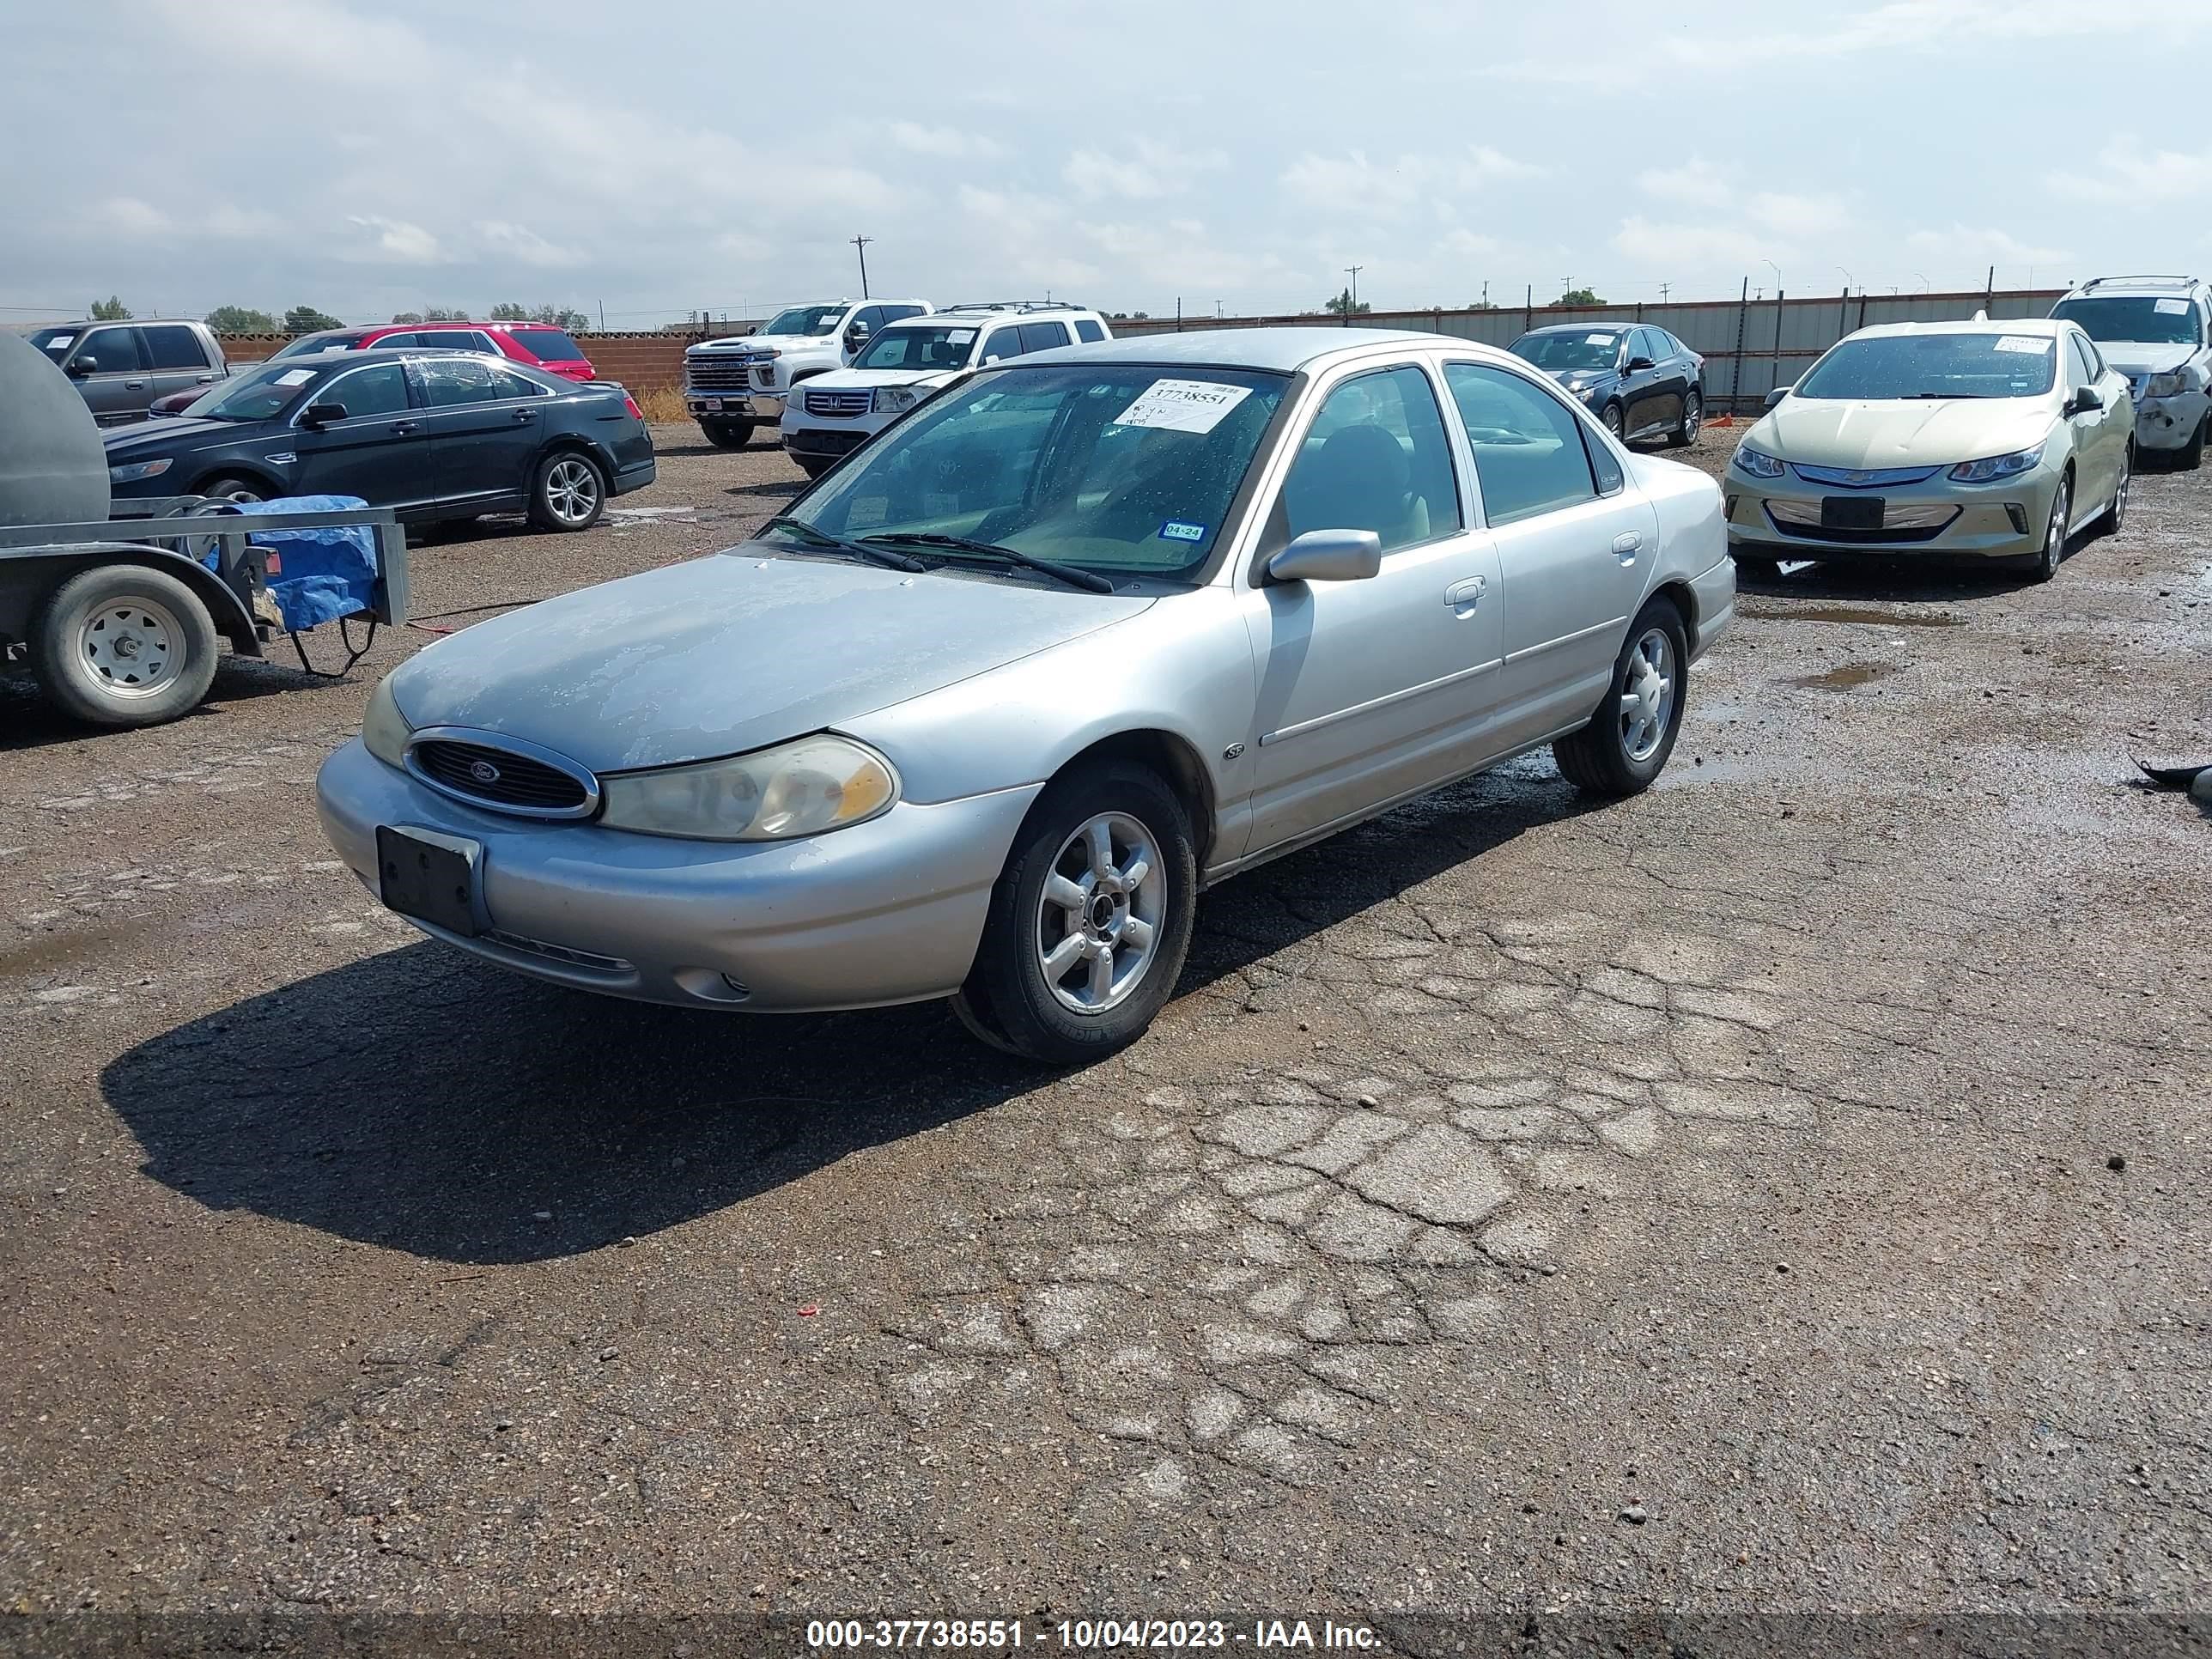 1FAFP6630WK229744  - FORD CONTOUR  1998 IMG - 1